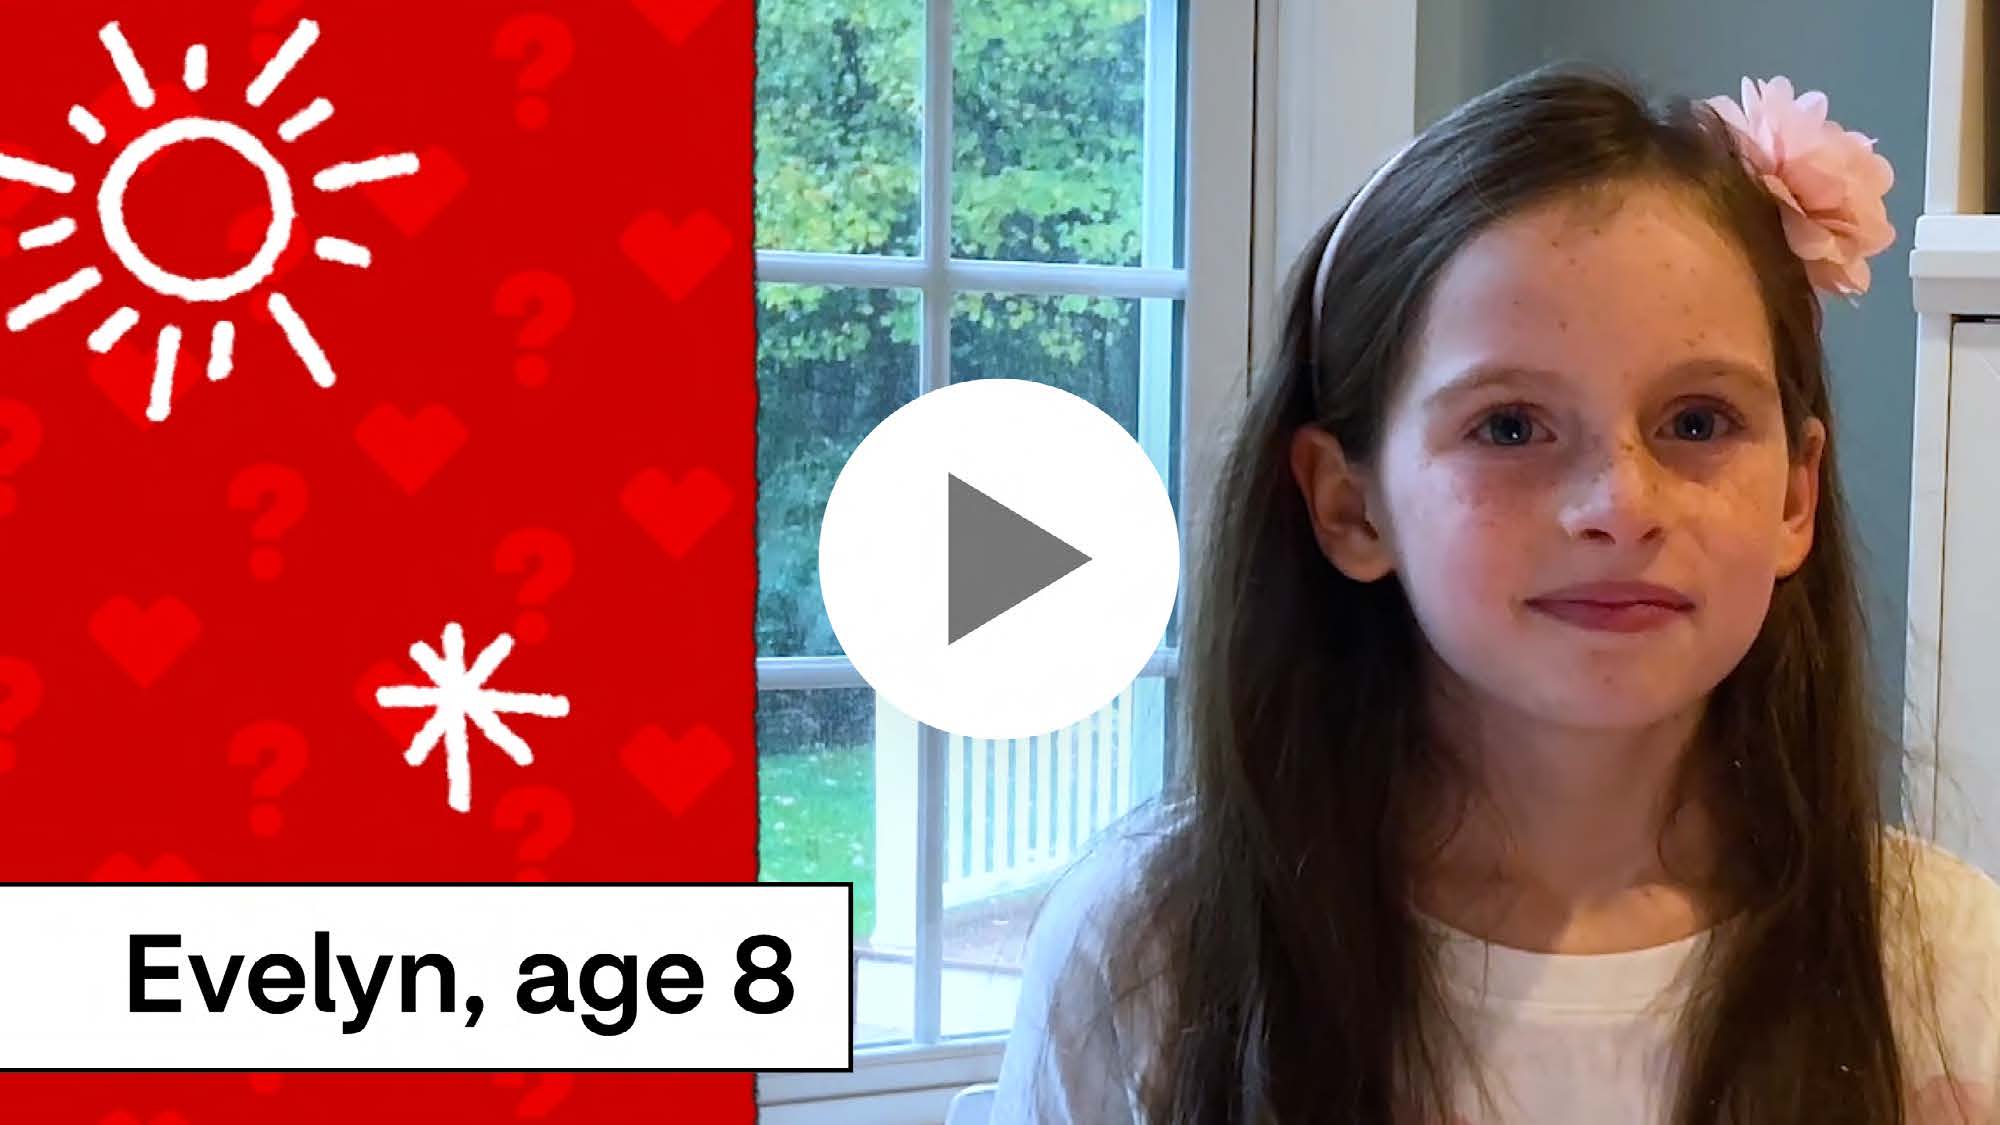 Play video of Evelyn, age 8, asking “Will I have any side effects from the COVID-19 vaccine?”